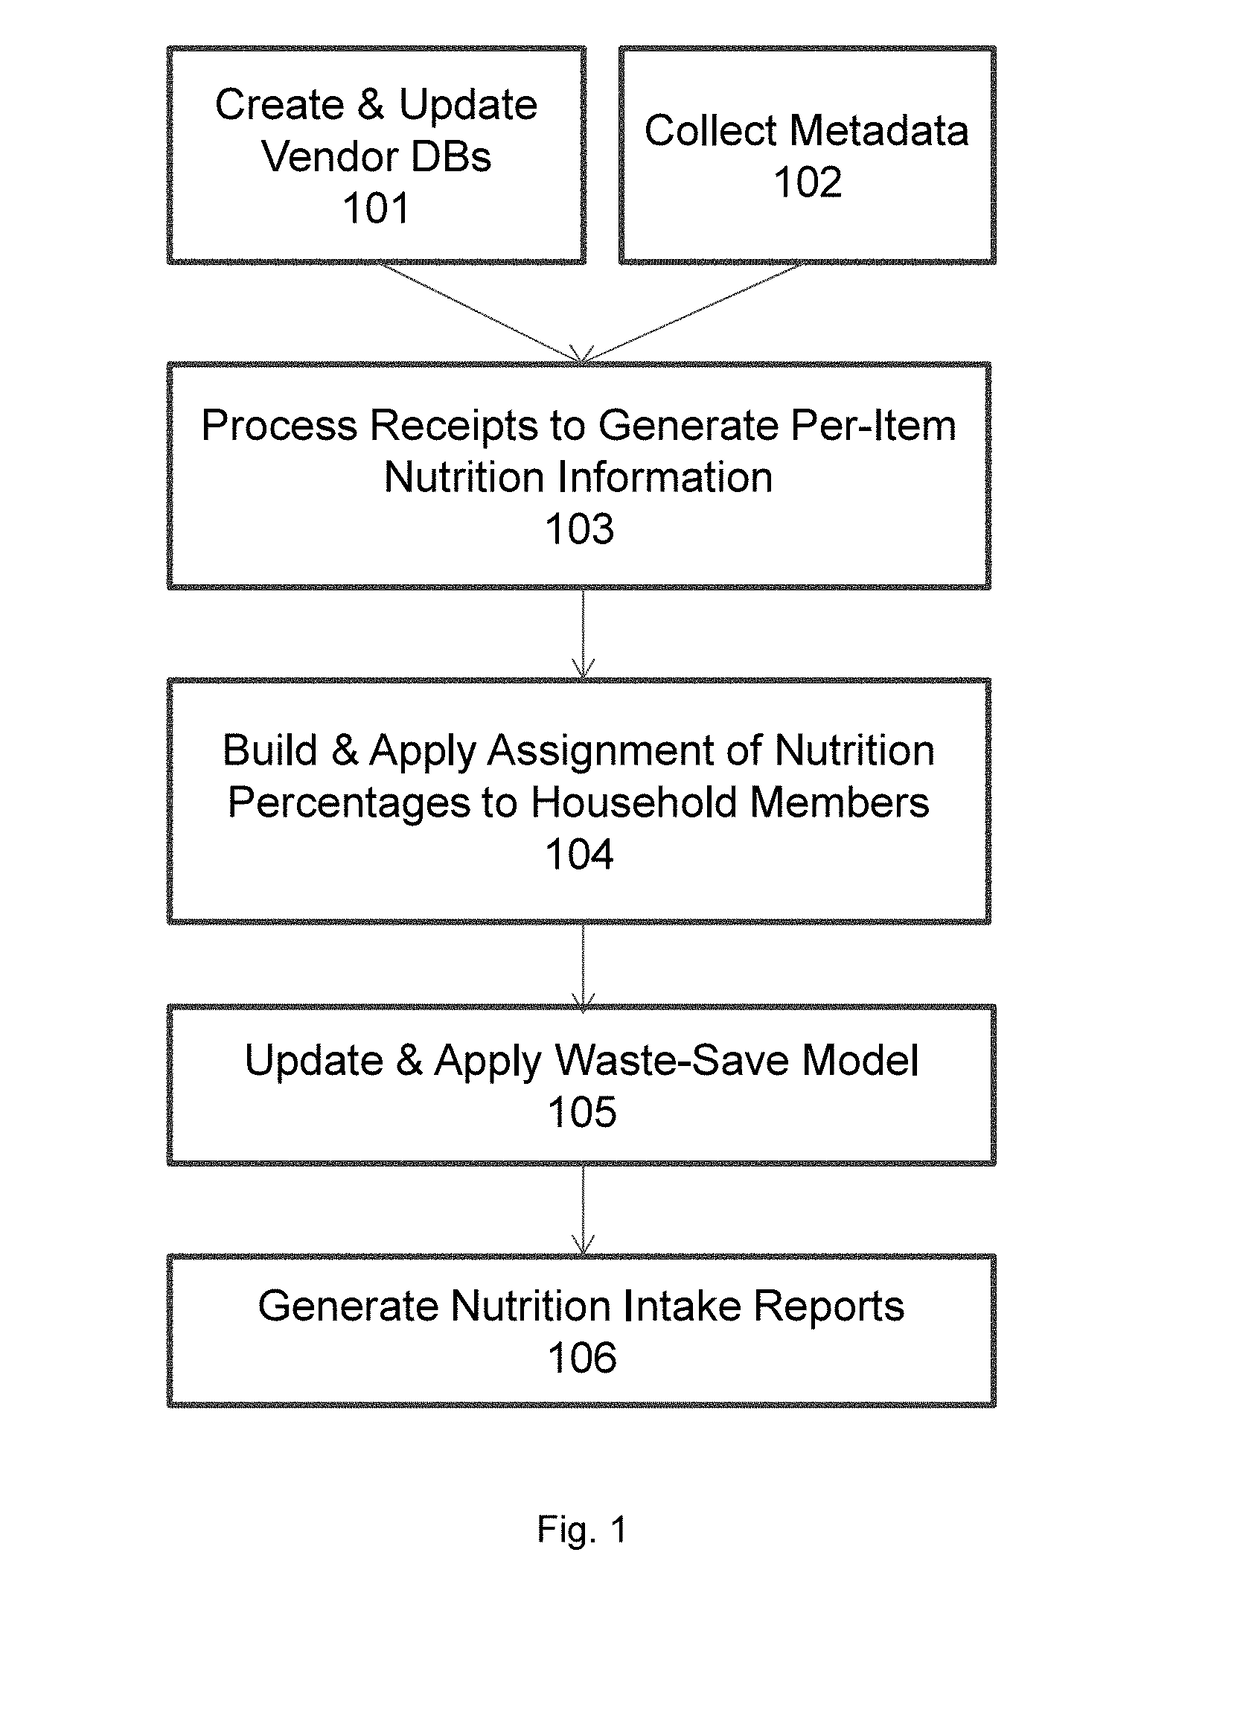 Efficiently Building Nutrition Intake History from Images of Receipts